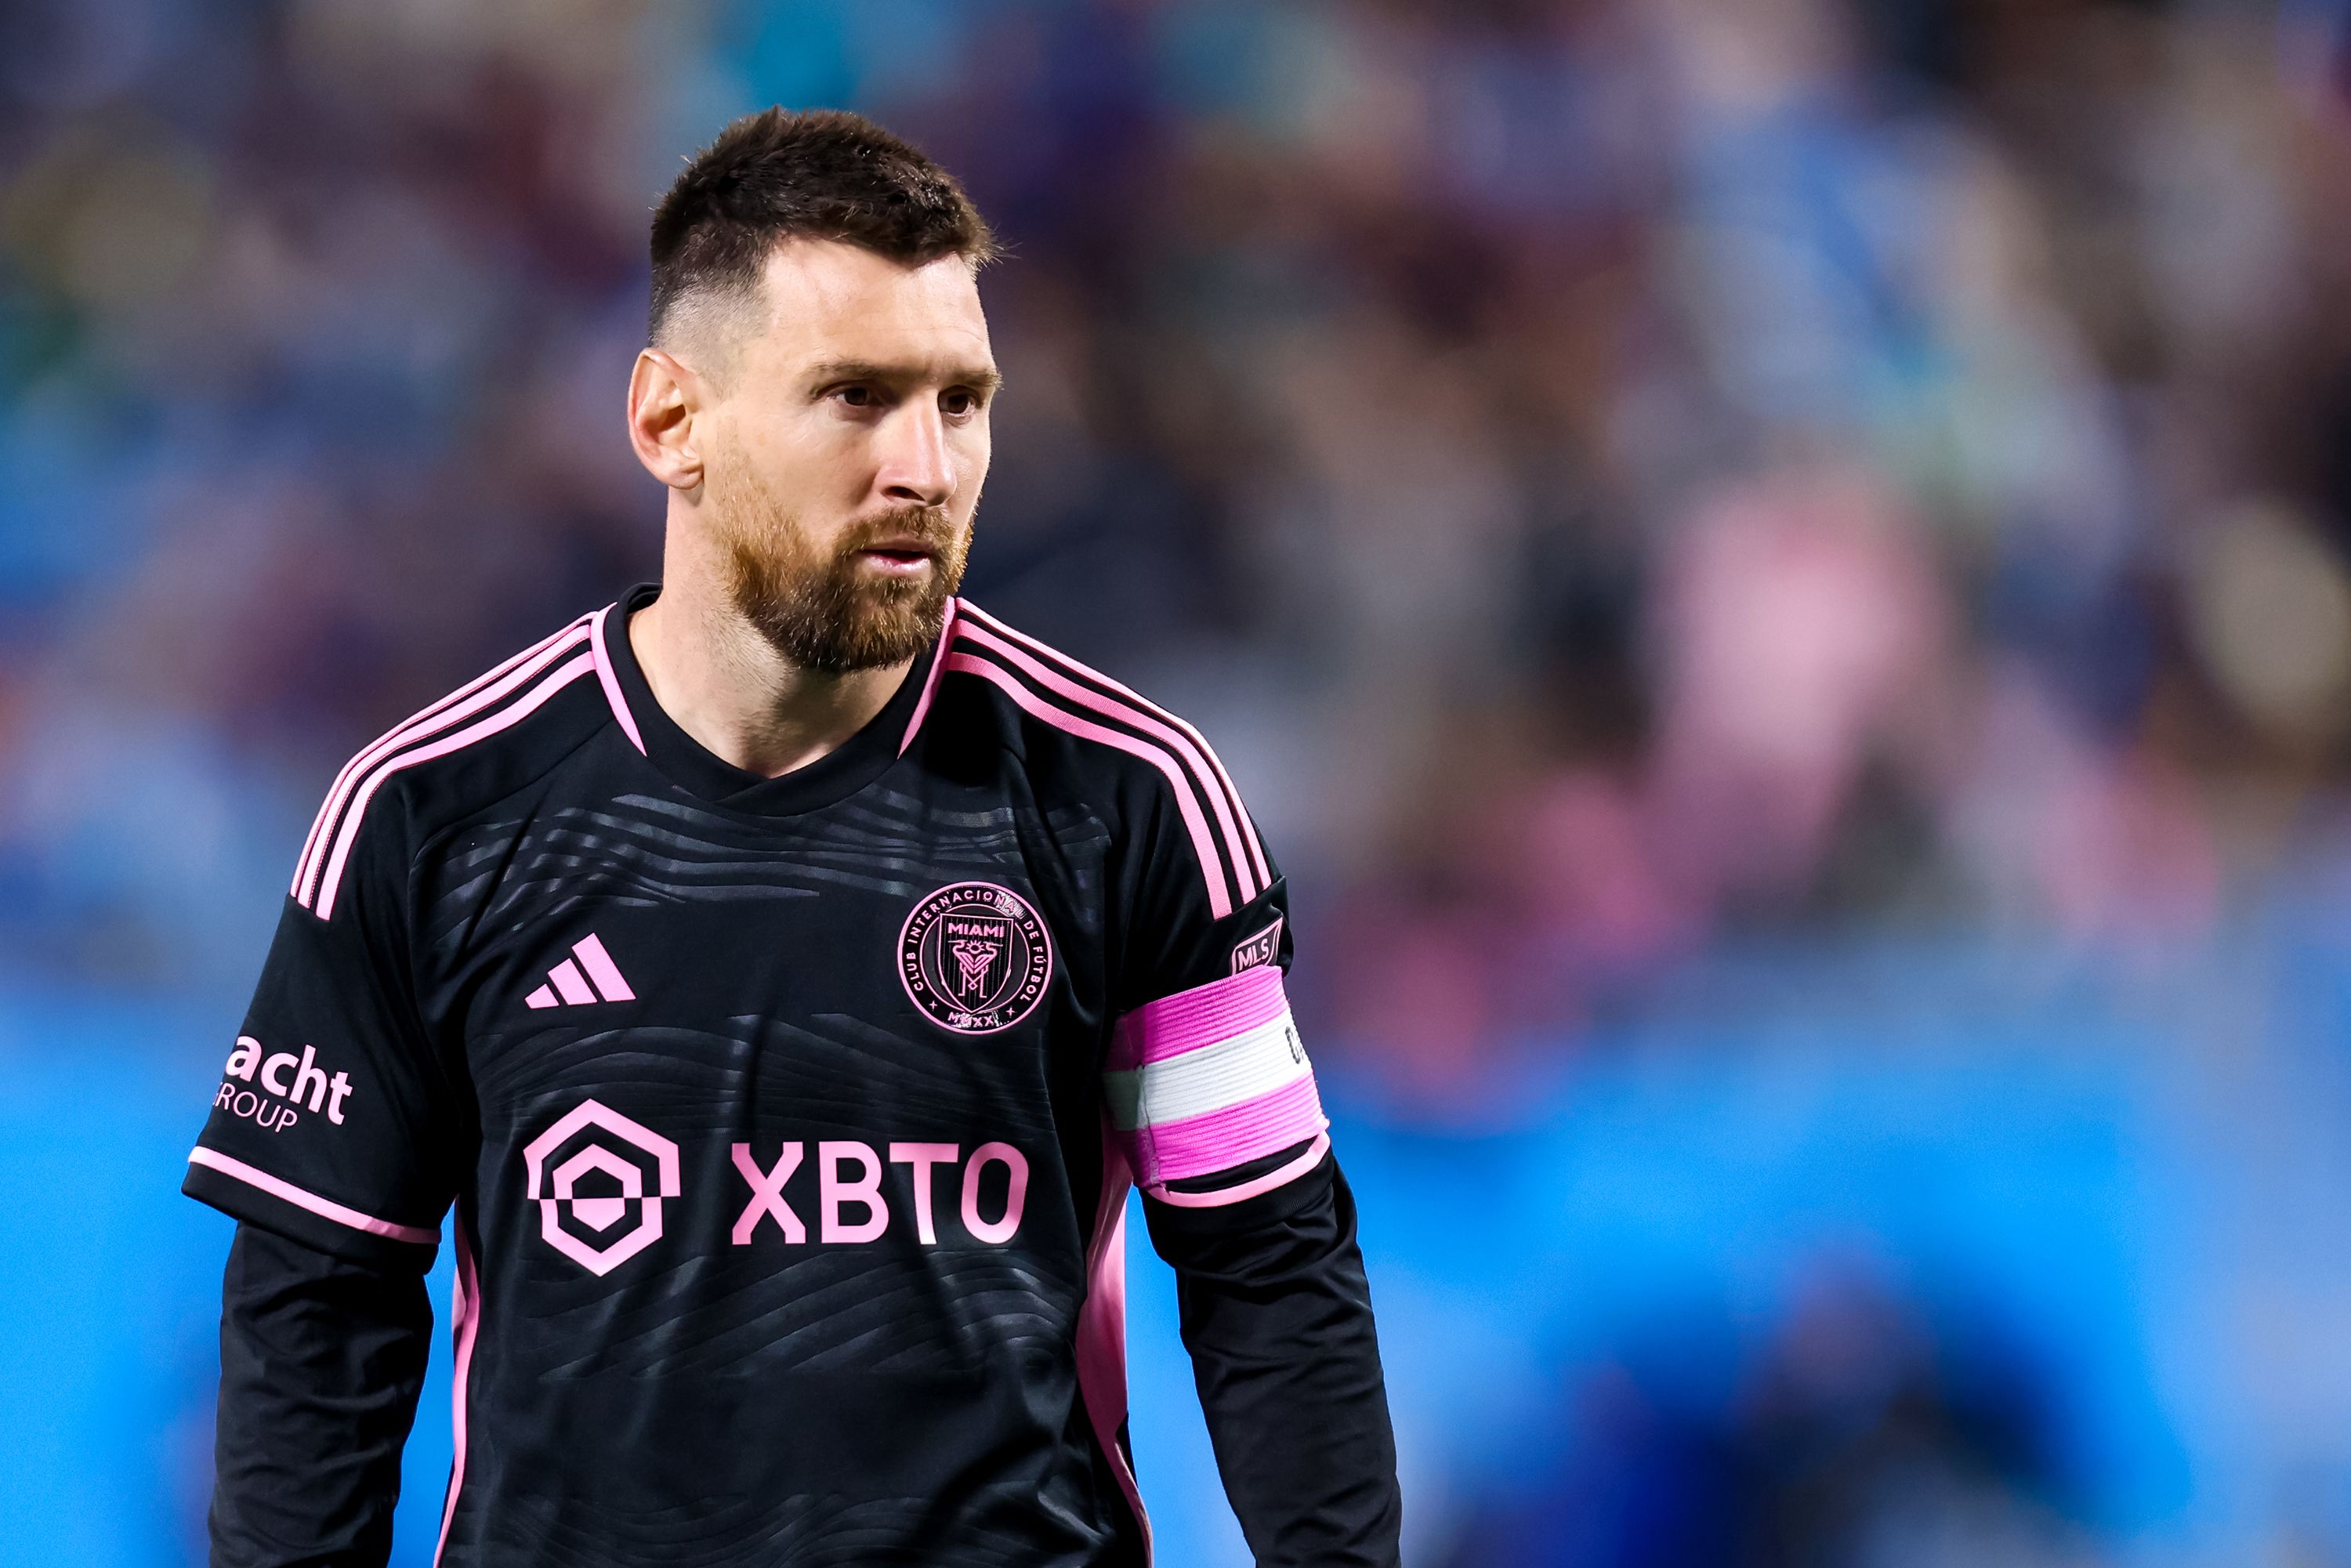 Lionel Messi in starting lineup for Inter Miami in MLS season